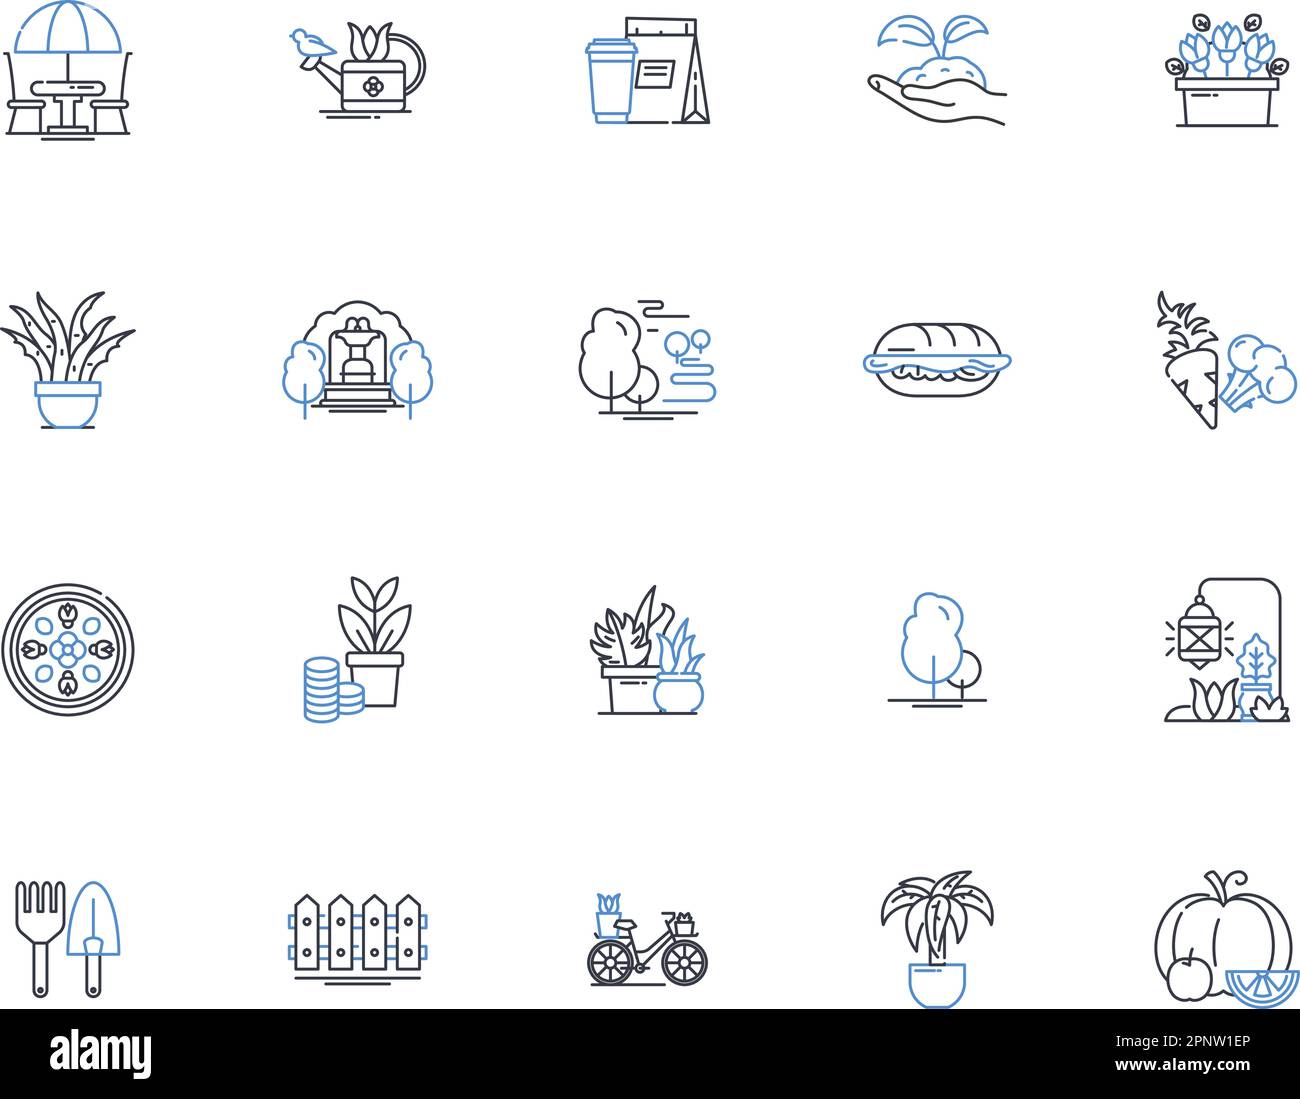 Animal Husbandry line icons collection. Livestock, Grazing, Breeding, Feed, Hatchery, Flock, Herd vector and linear illustration. Husbandry,Poultry Stock Vector